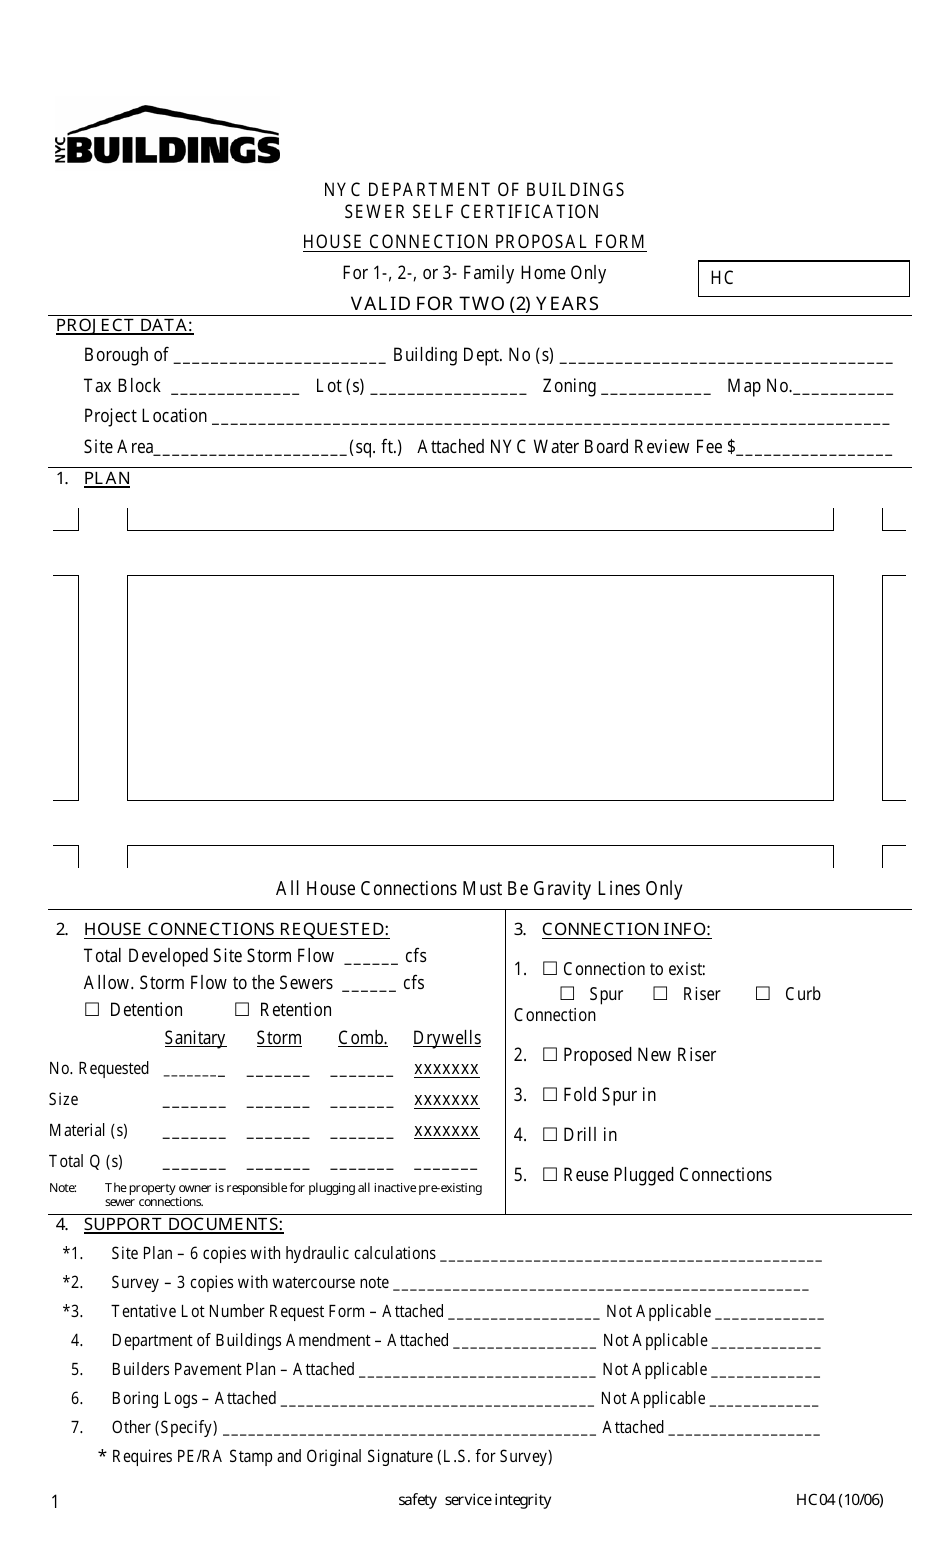 Form HC04 House Connection Proposal Form - New York City, Page 1